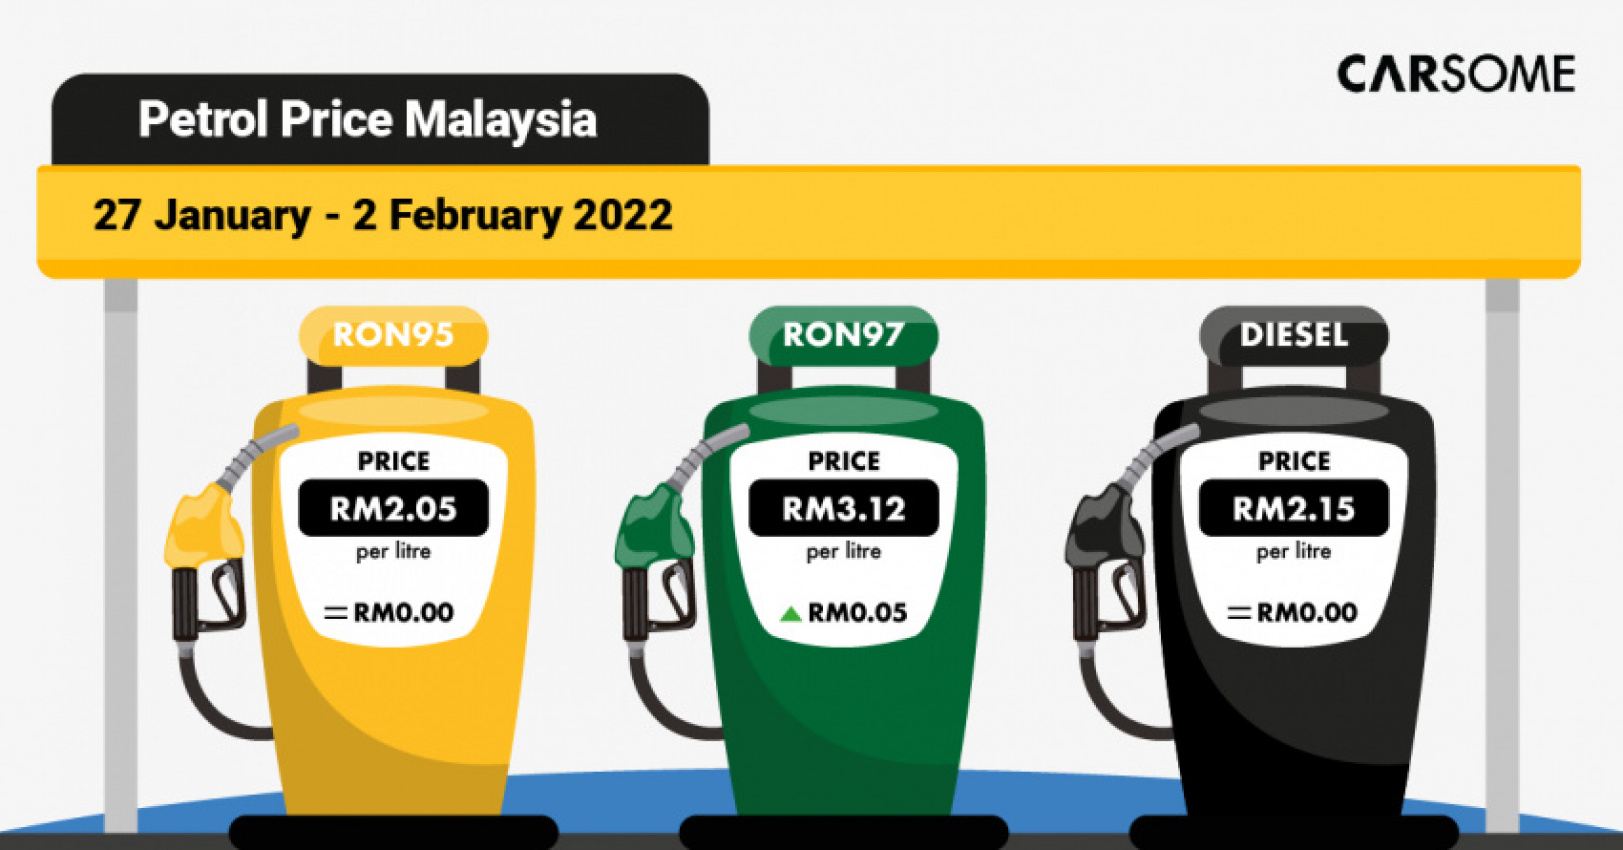 autos, cars, petrol price, weekly petrol price for ron95, ron97 & diesel in malaysia